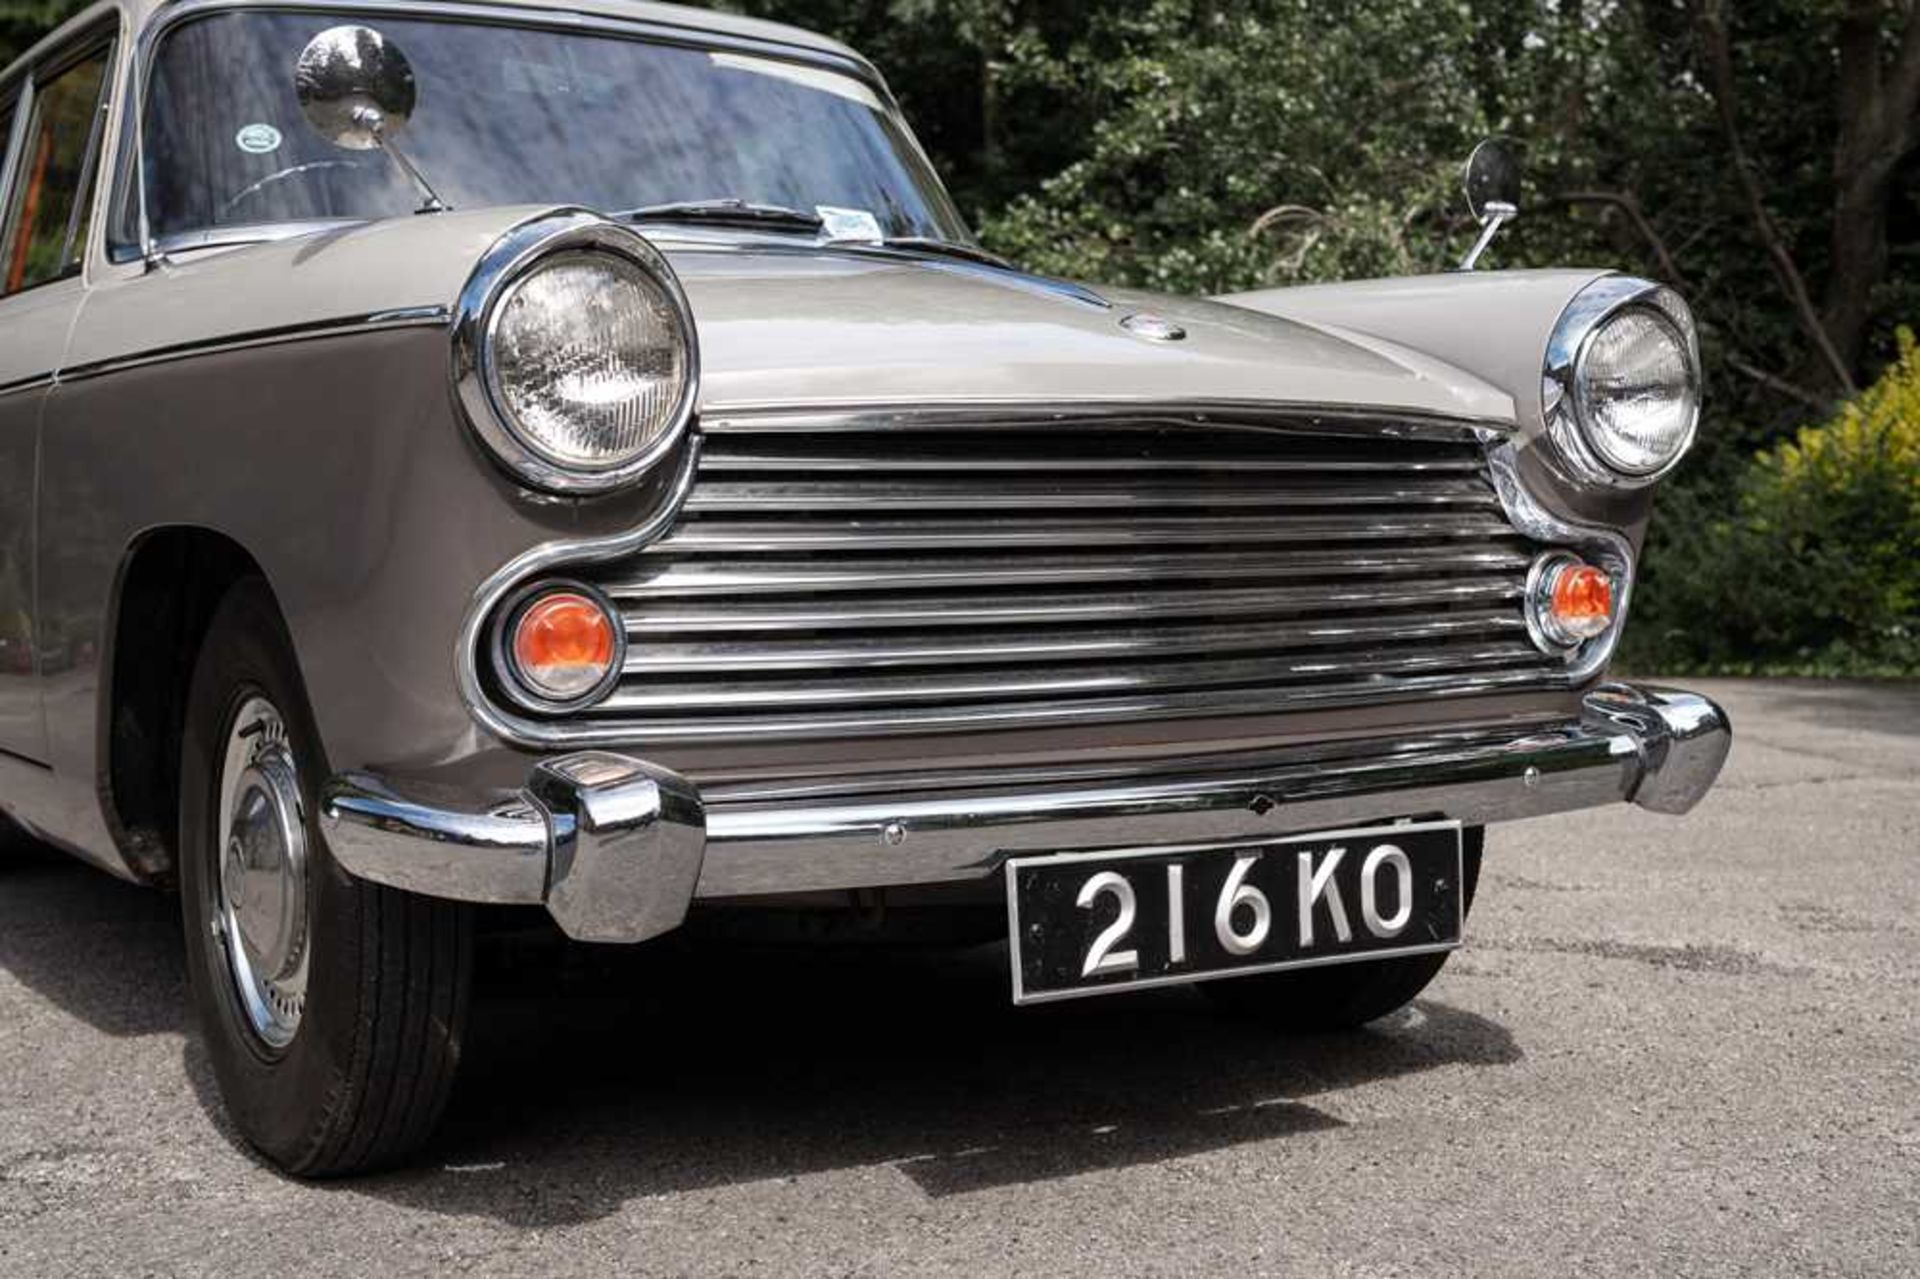 1964 Morris Oxford Series VI Farina Traveller Just 7,000 miles from new - Image 15 of 98